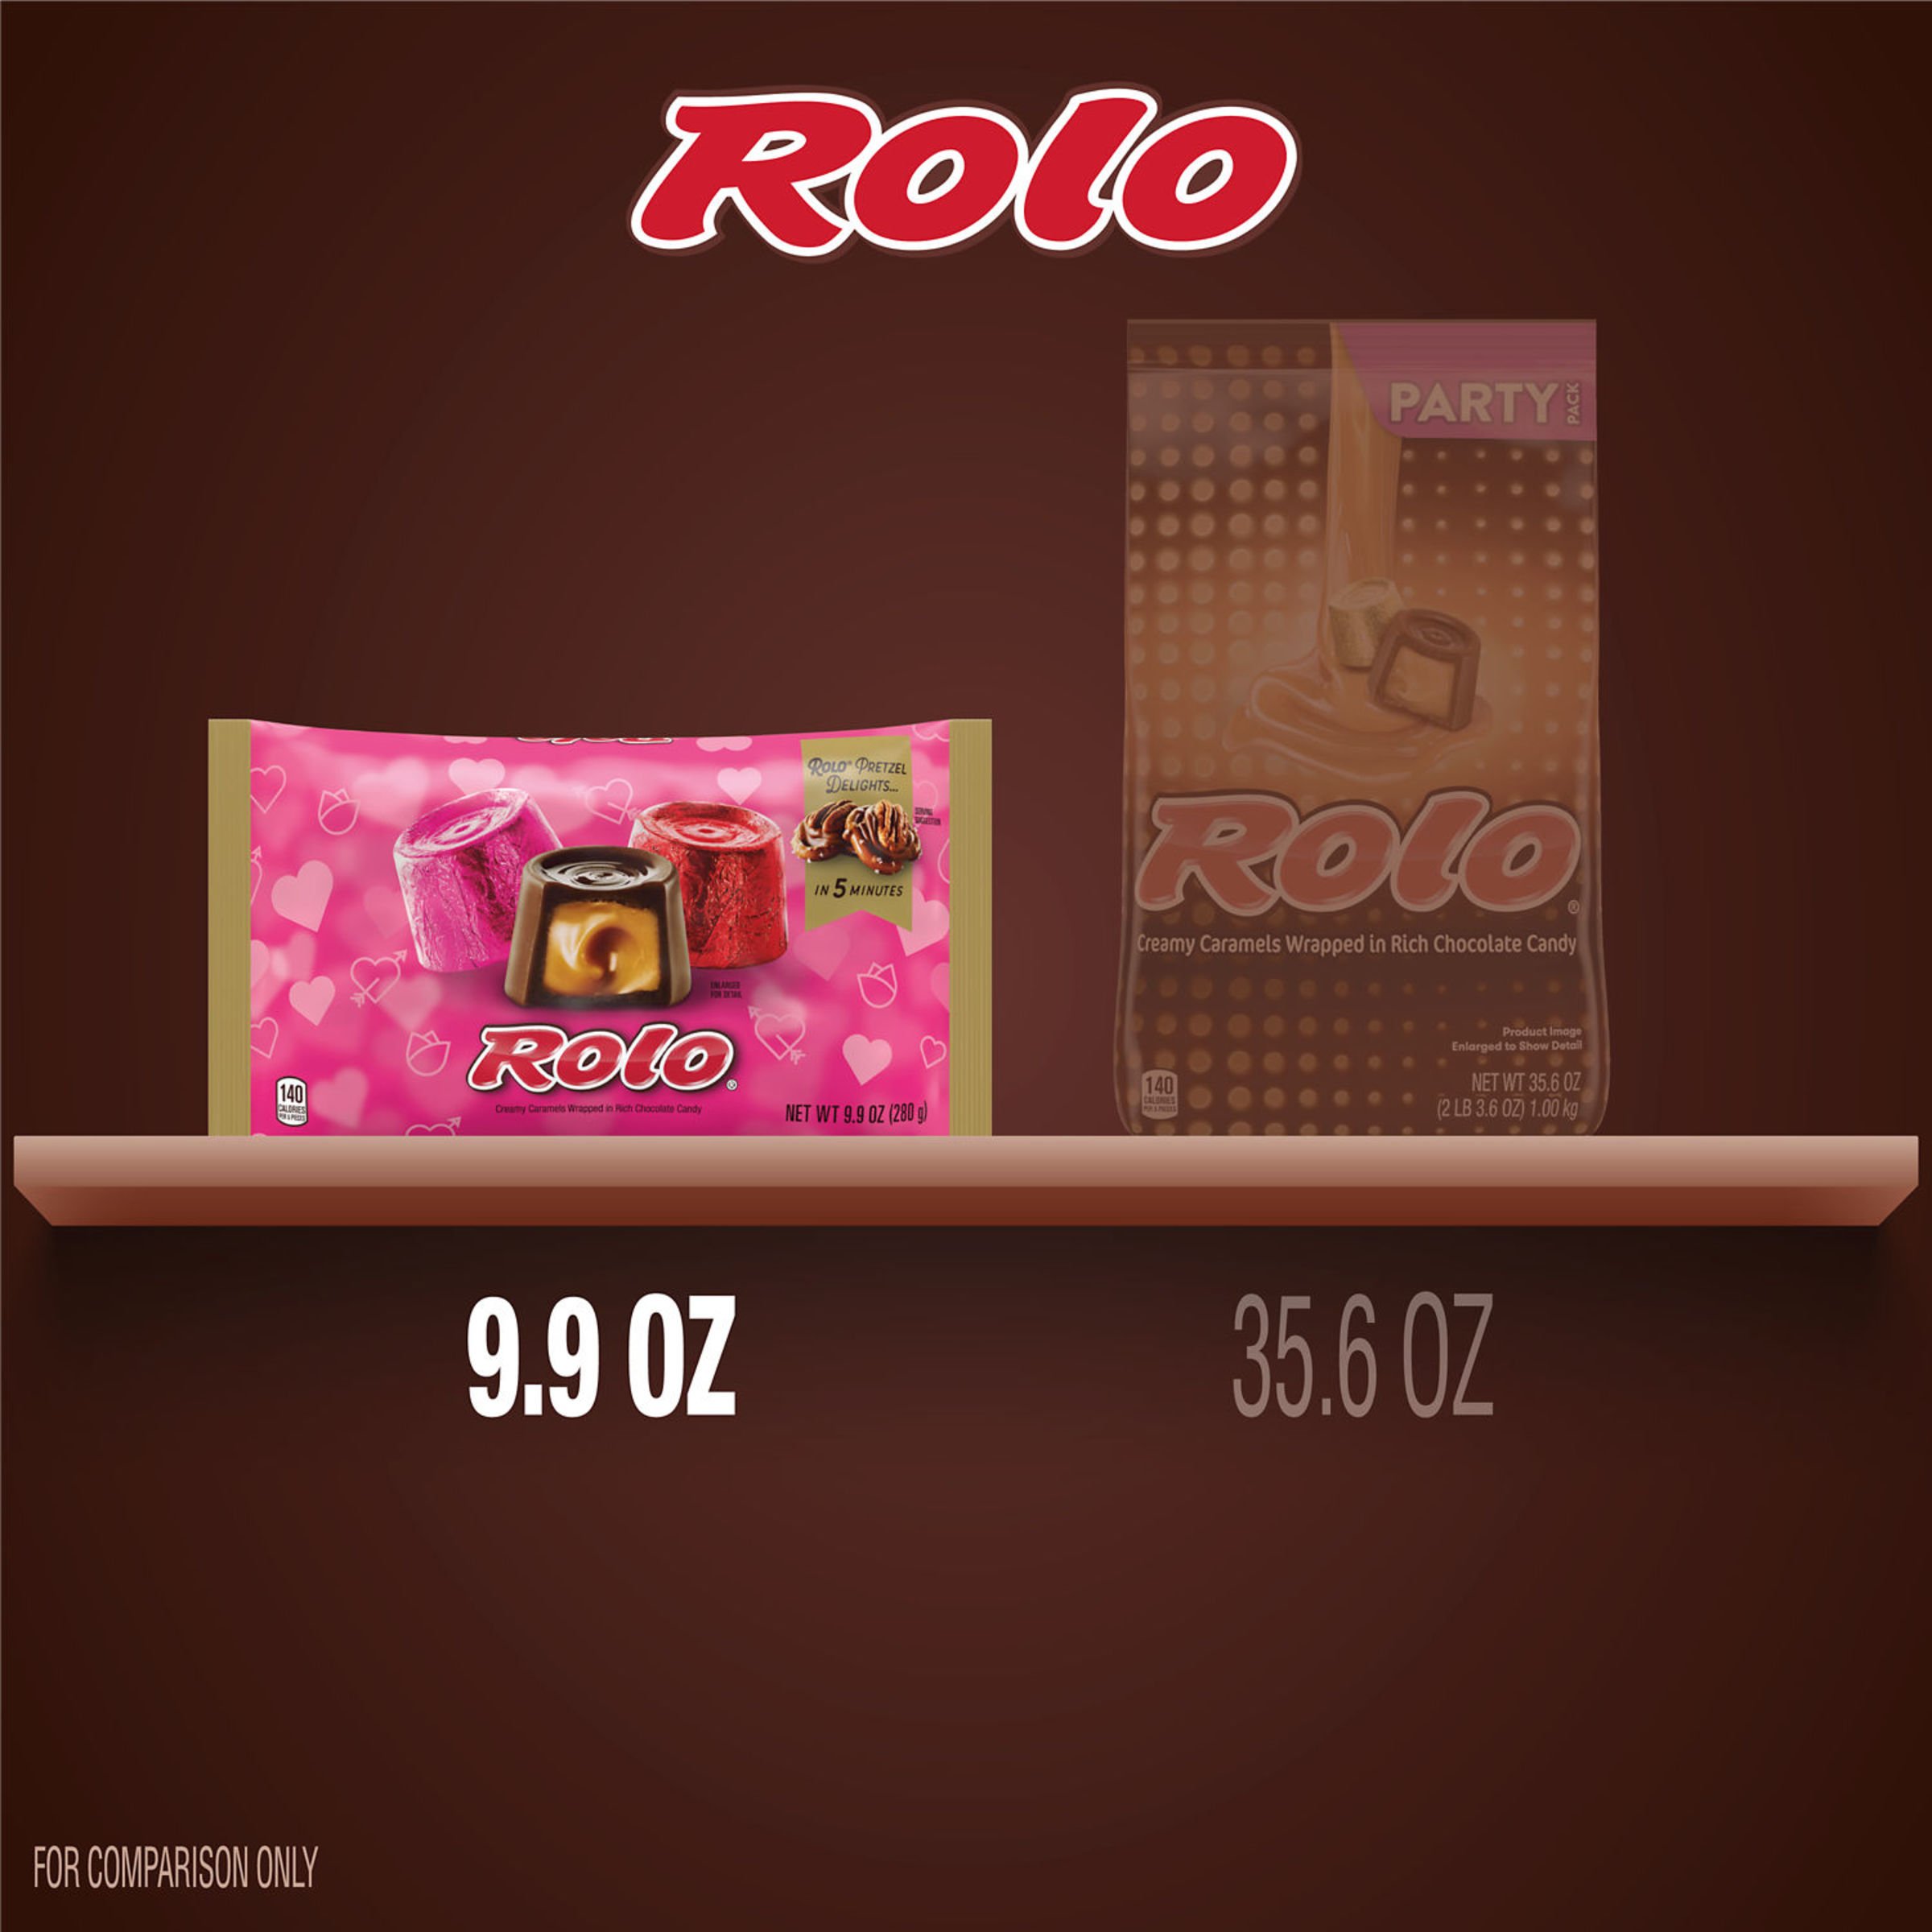 Rolo Creamy Caramel in Rich Chocolate Candy - Shop Candy at H-E-B